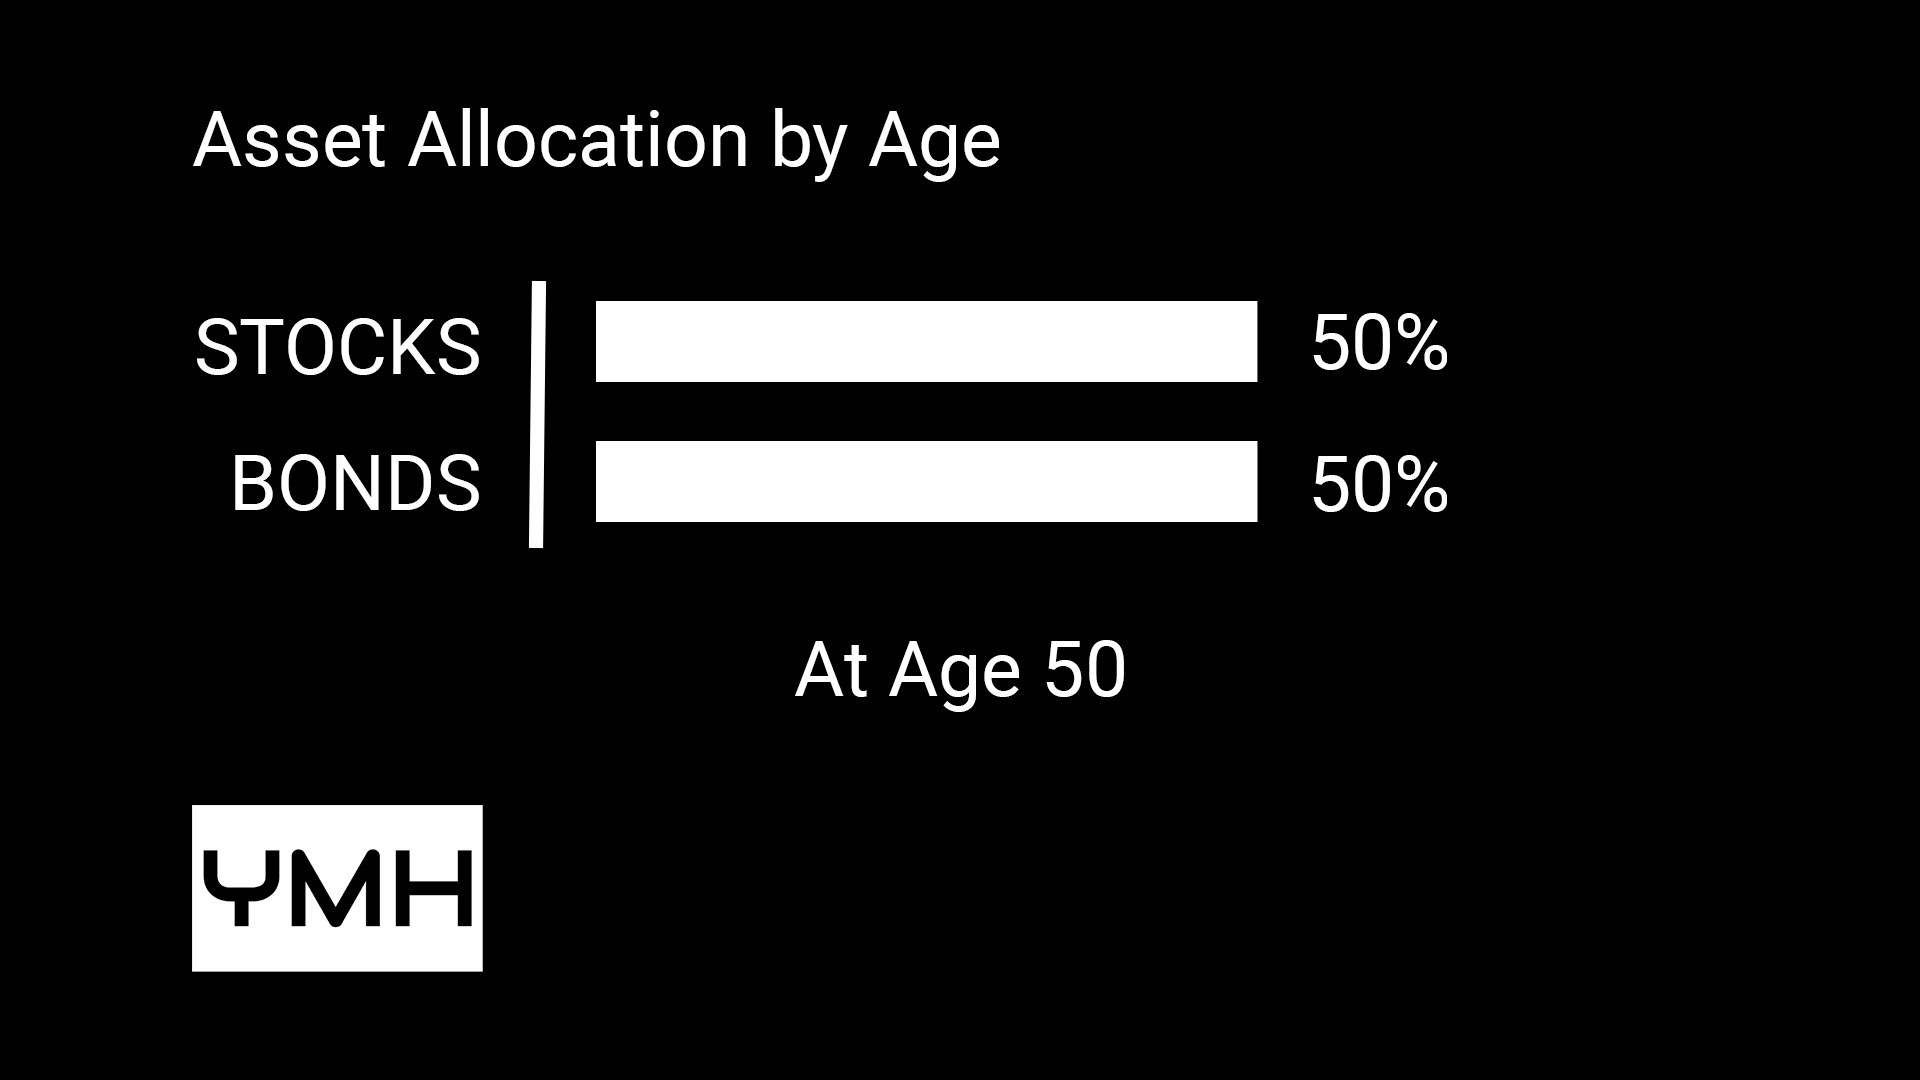 A chart showing a 50-50 split between stocks and bonds for investors age 50.